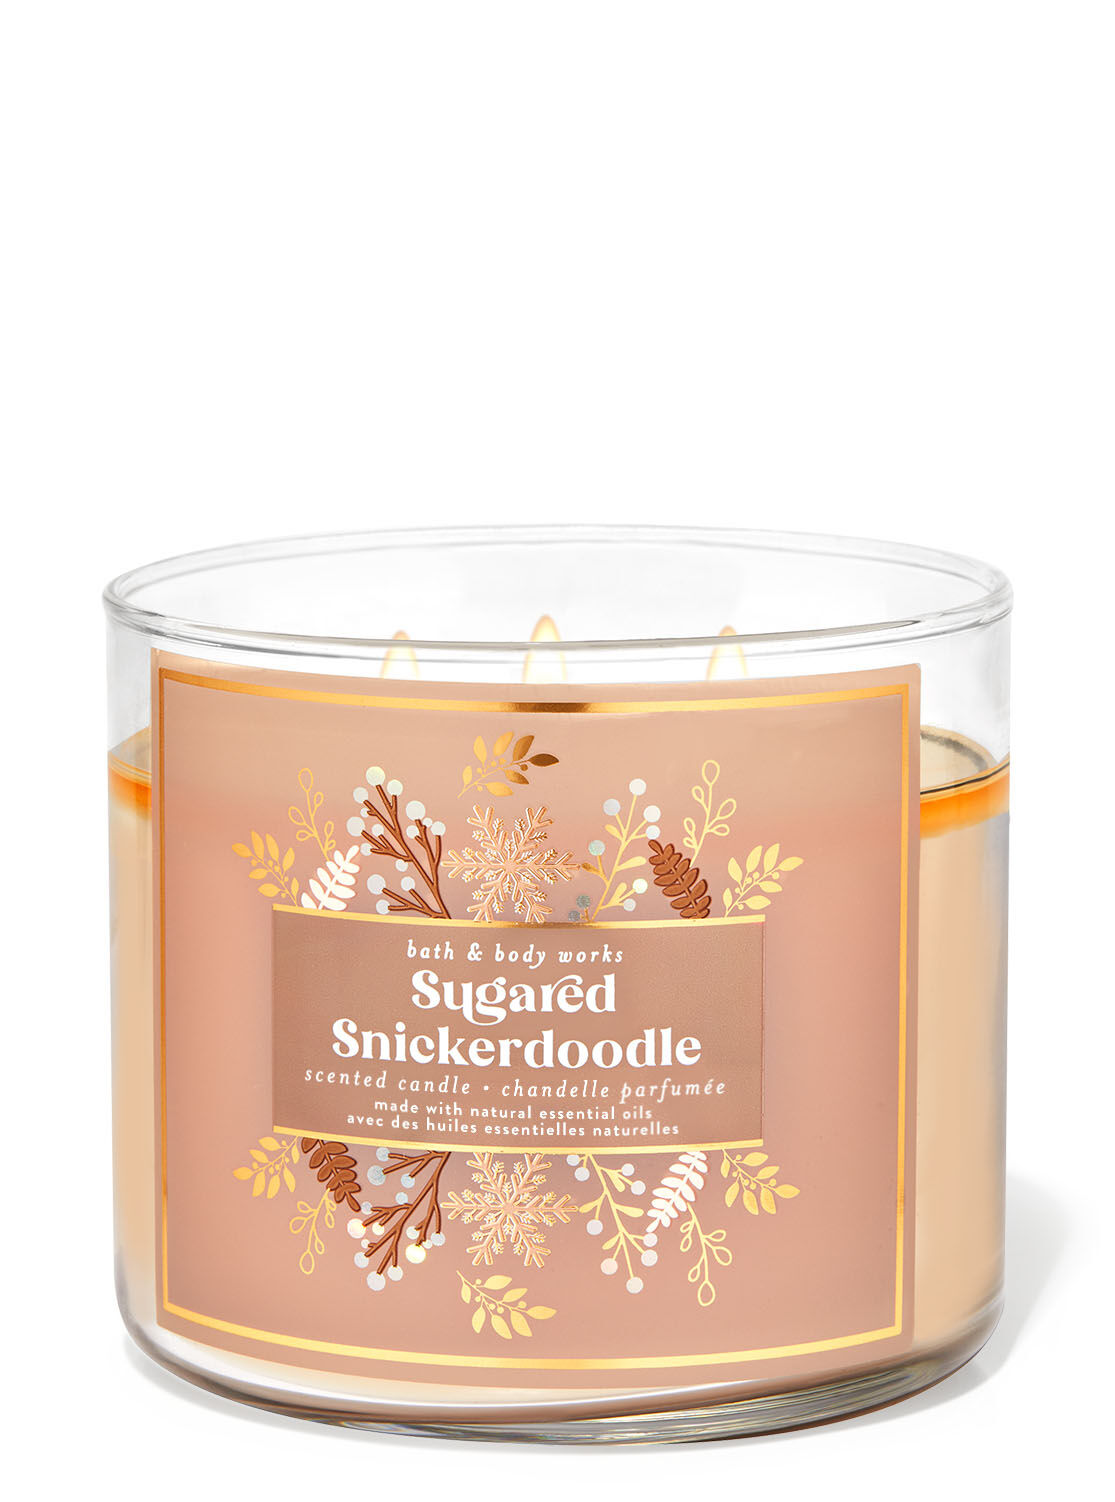 Bath & Body Works Sugared Snickerdoodle 3 Wick Scented Candle 14.5 oz 